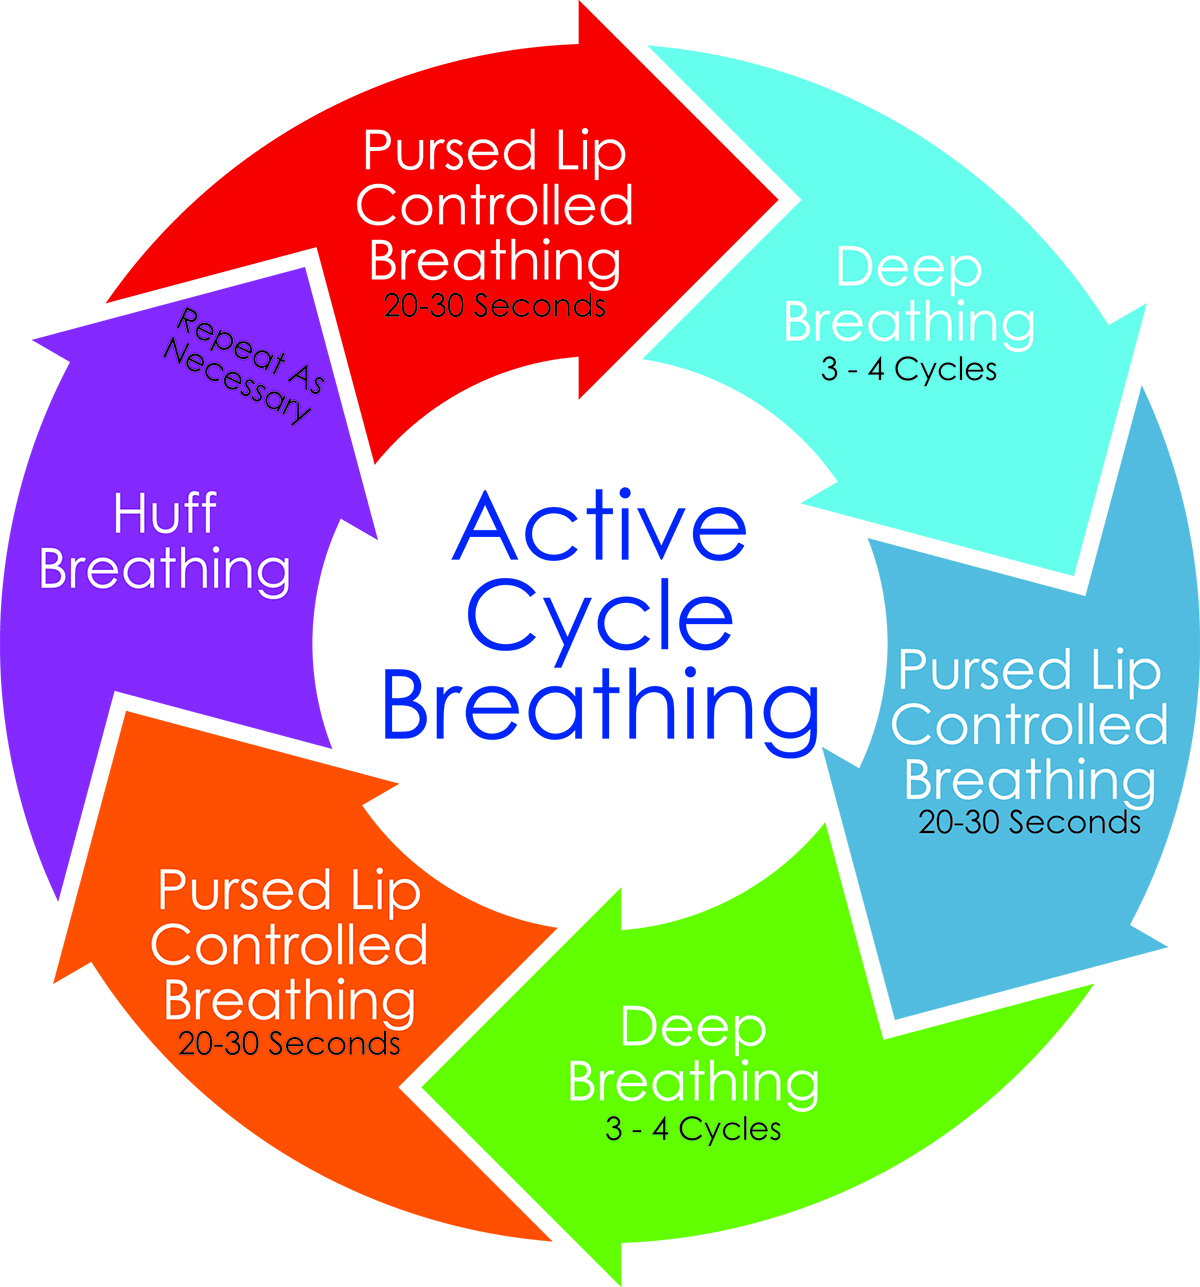 How to Achieve a Good Night of Sleep Through Reduced Breathing?